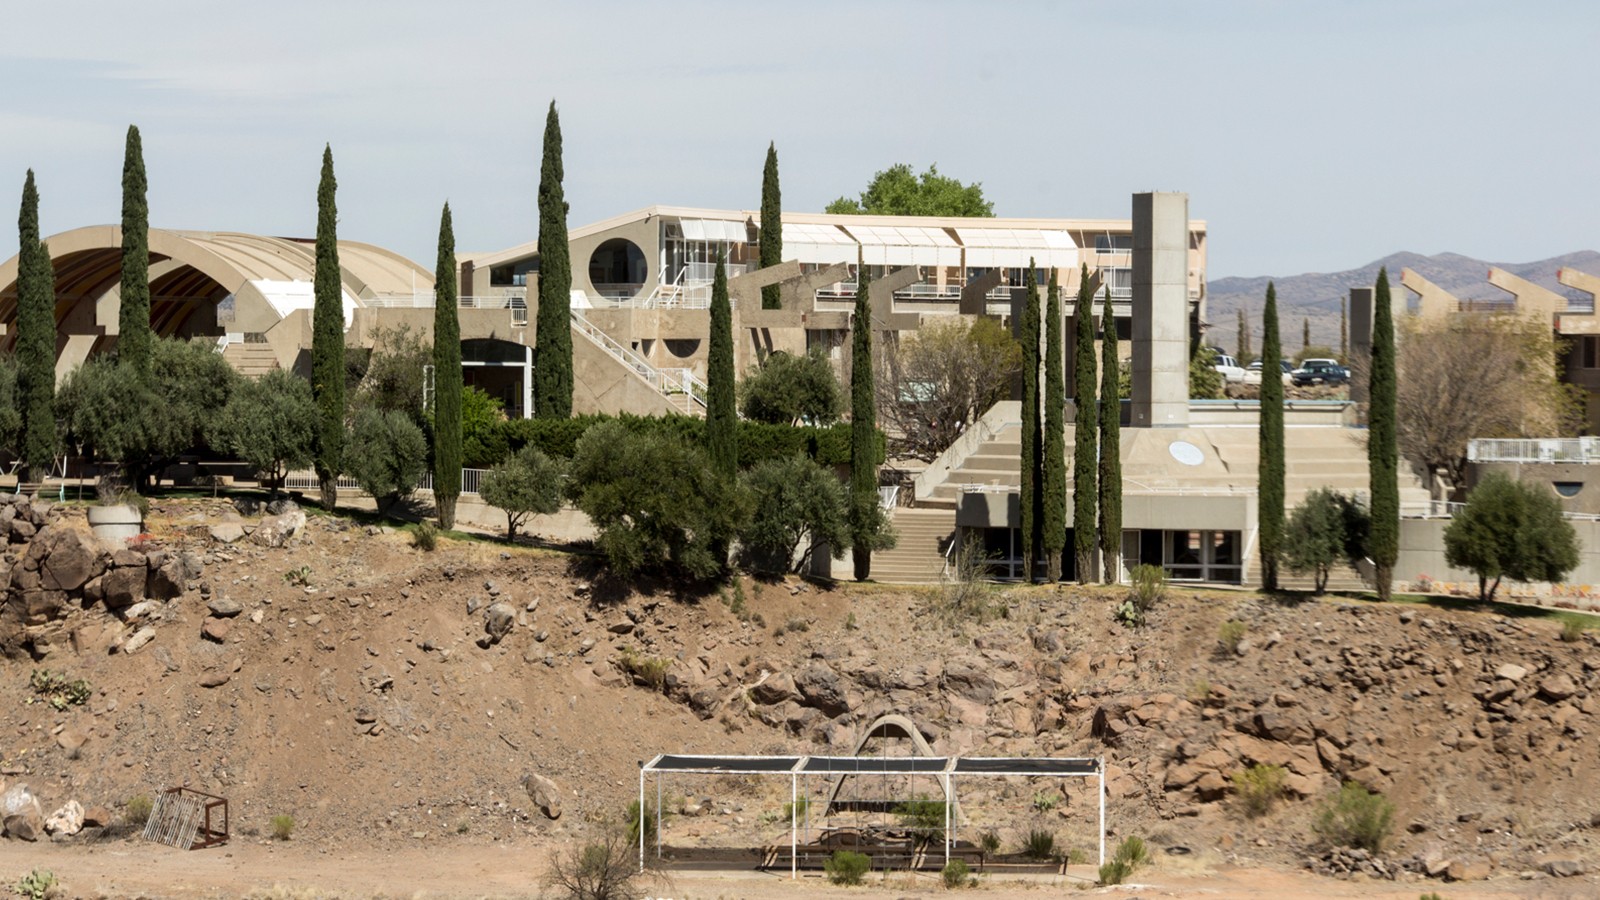 What is Arcosanti?